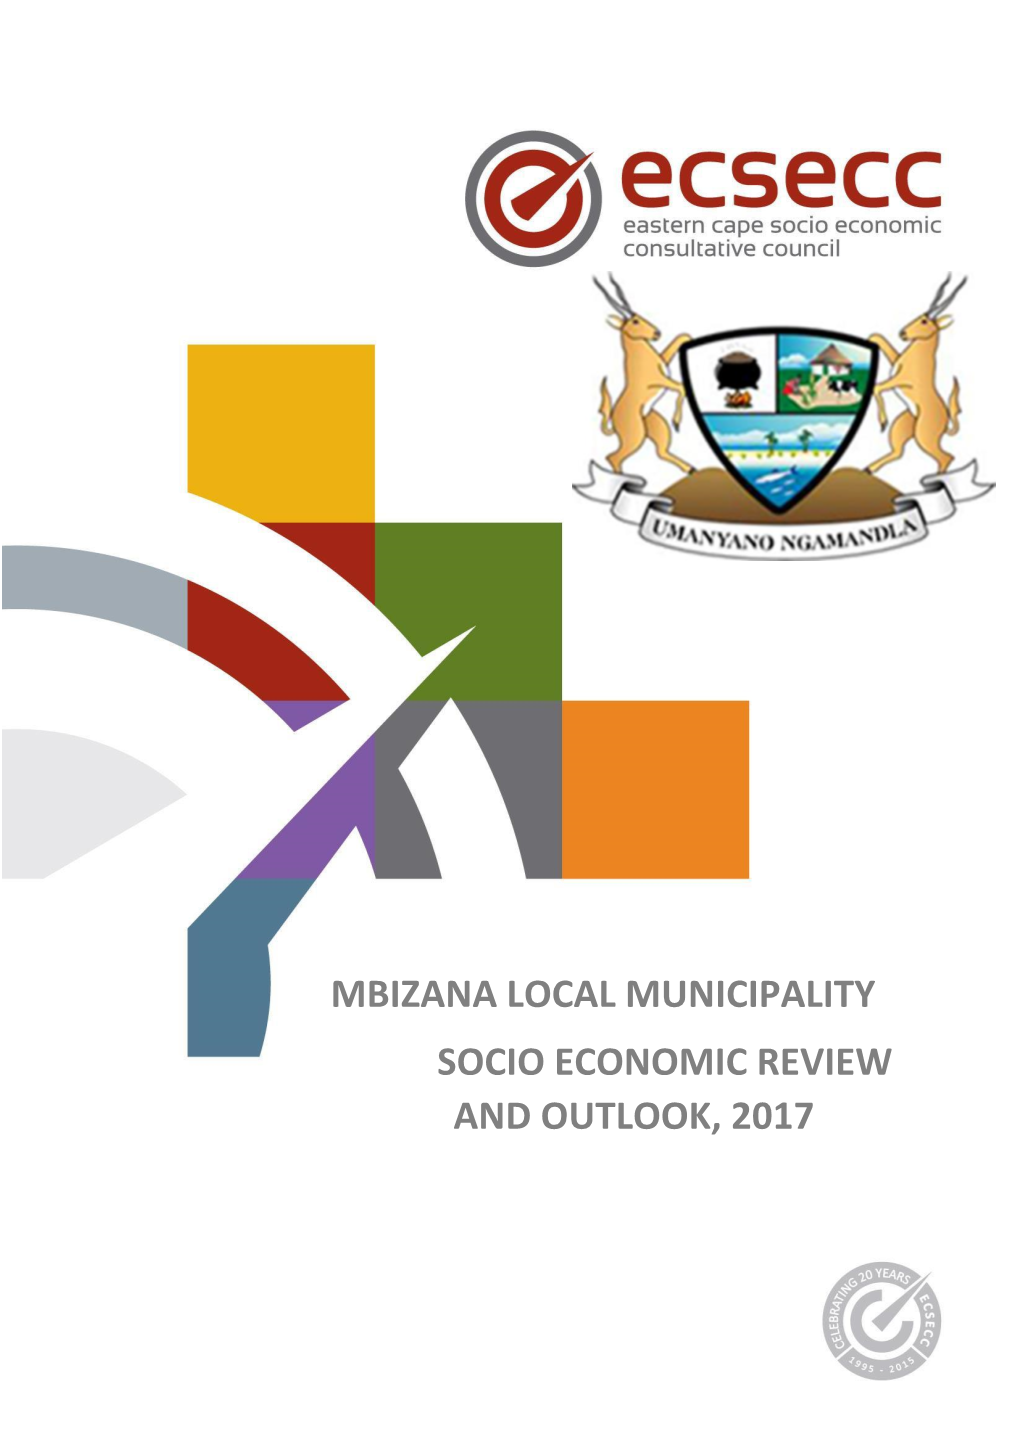 Mbizana Local Municipality Socio Economic Review and Outlook, 2017